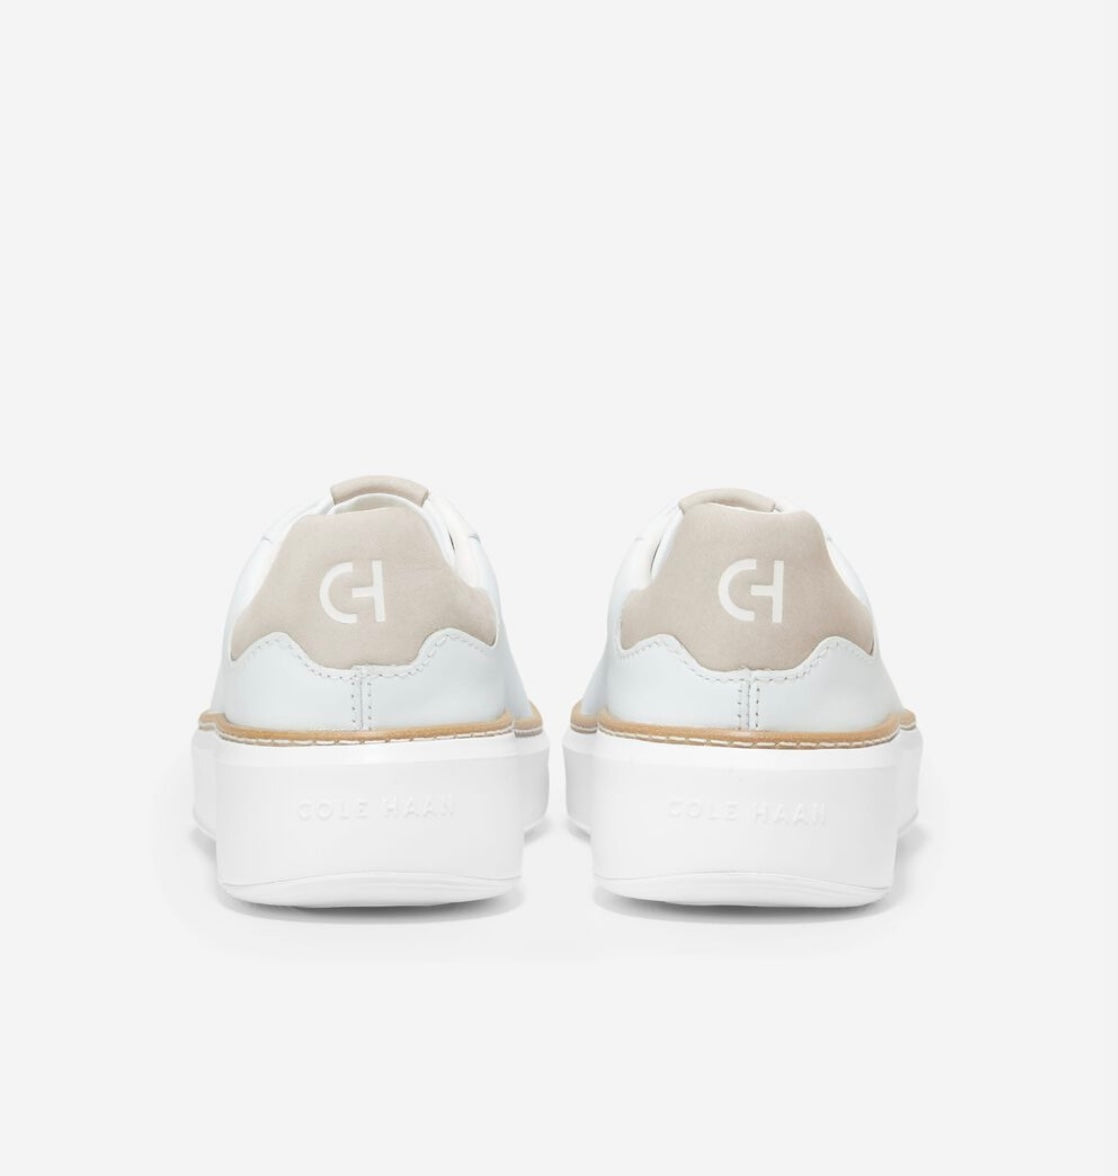 Cole Haan GrandPro Topspin sneakers - White